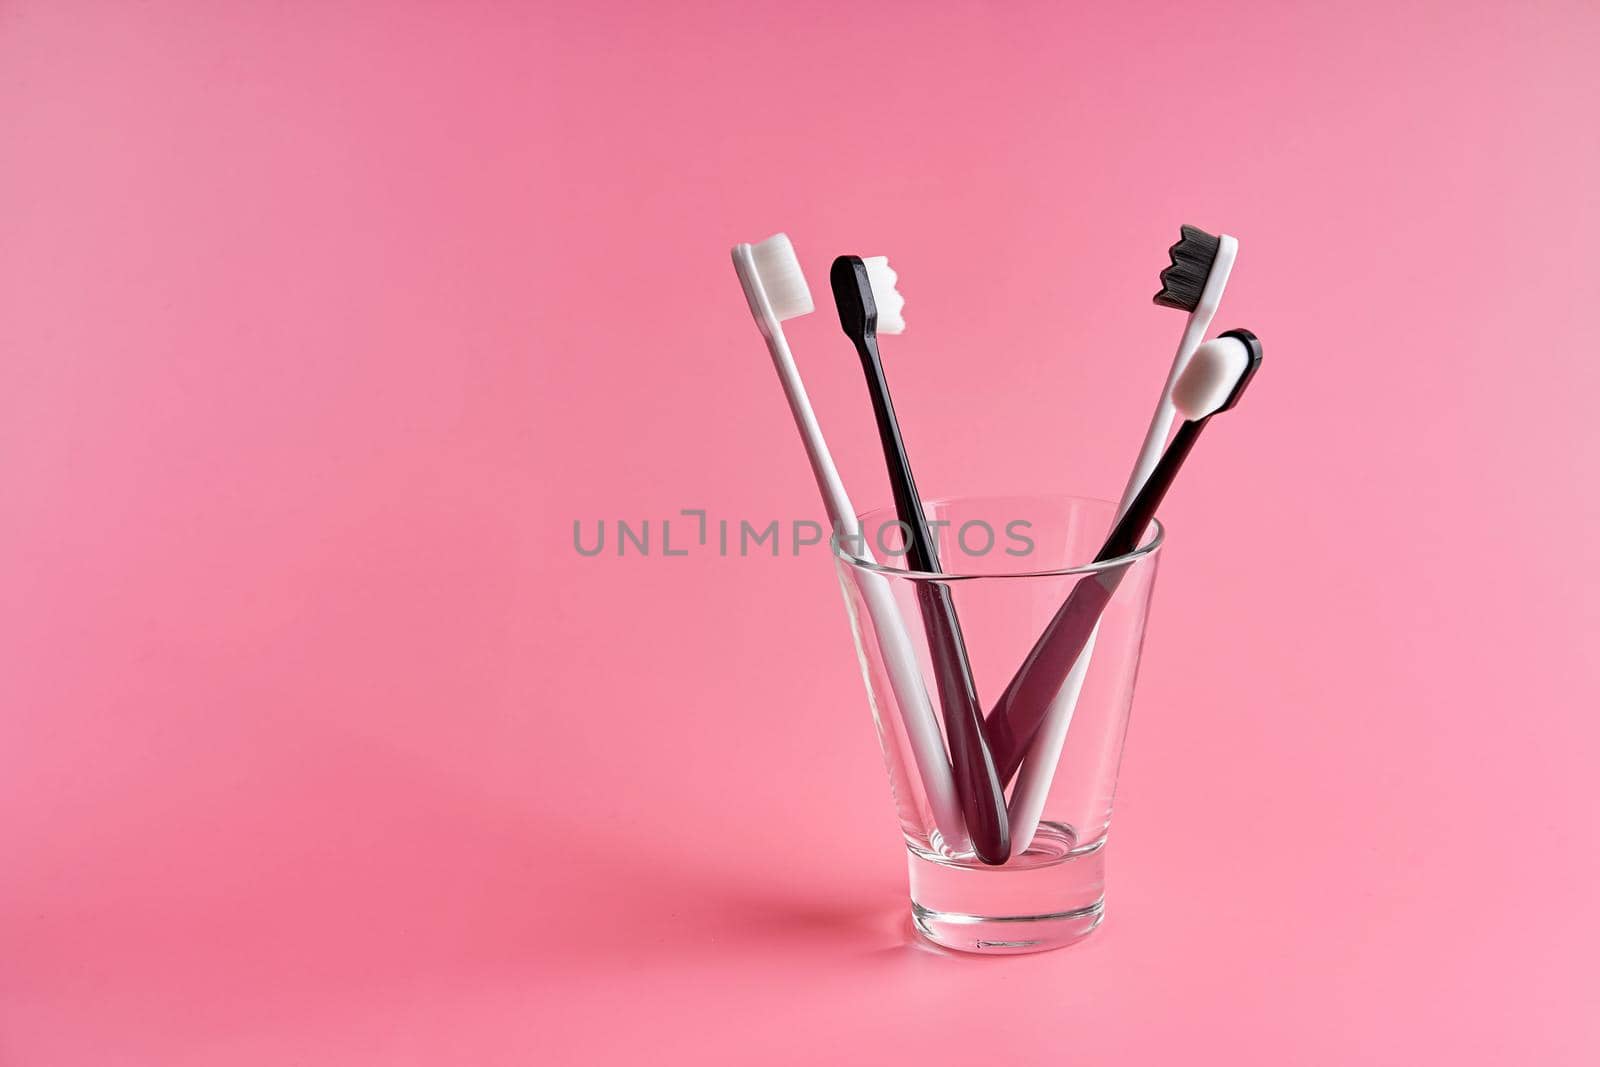 Fashionable toothbrush with soft bristles. Popular toothbrushes. Hygiene trends. Kit of toothbrushes in glass on pink background by Try_my_best